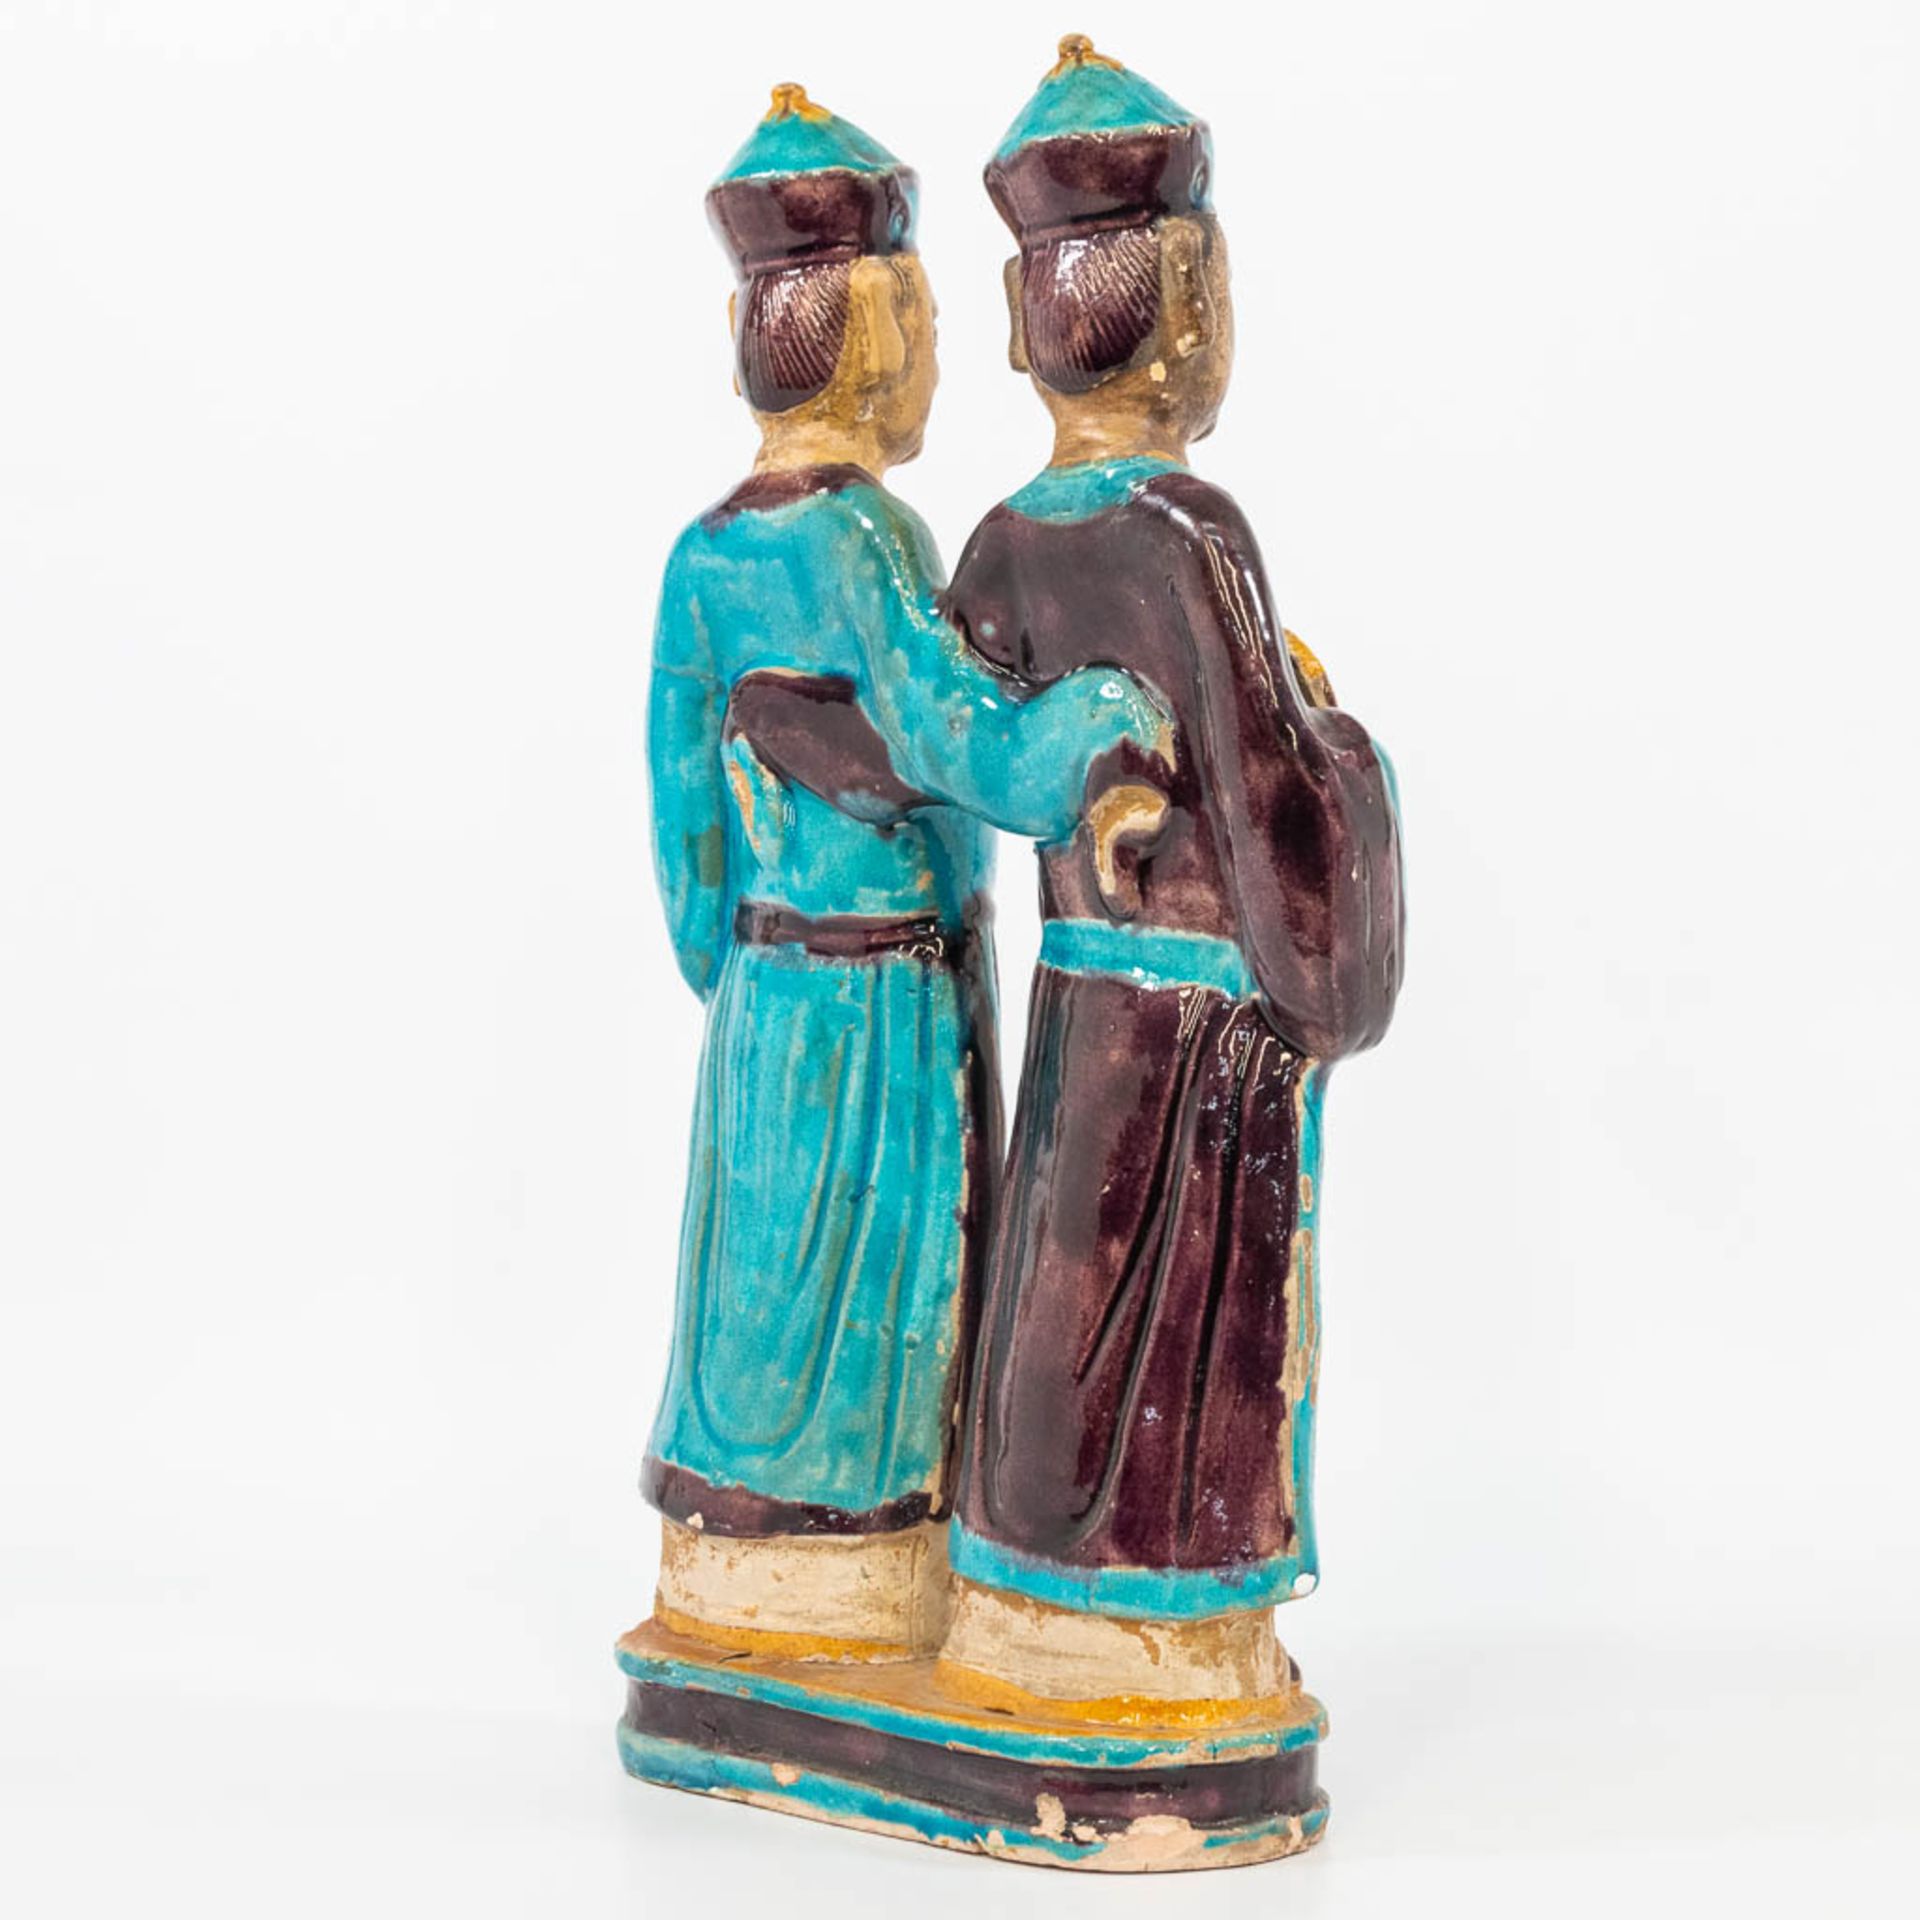 A statue made of glazed earthenware, a pair of Easern figurines. (8,5 x 24 x 41 cm) - Bild 4 aus 16